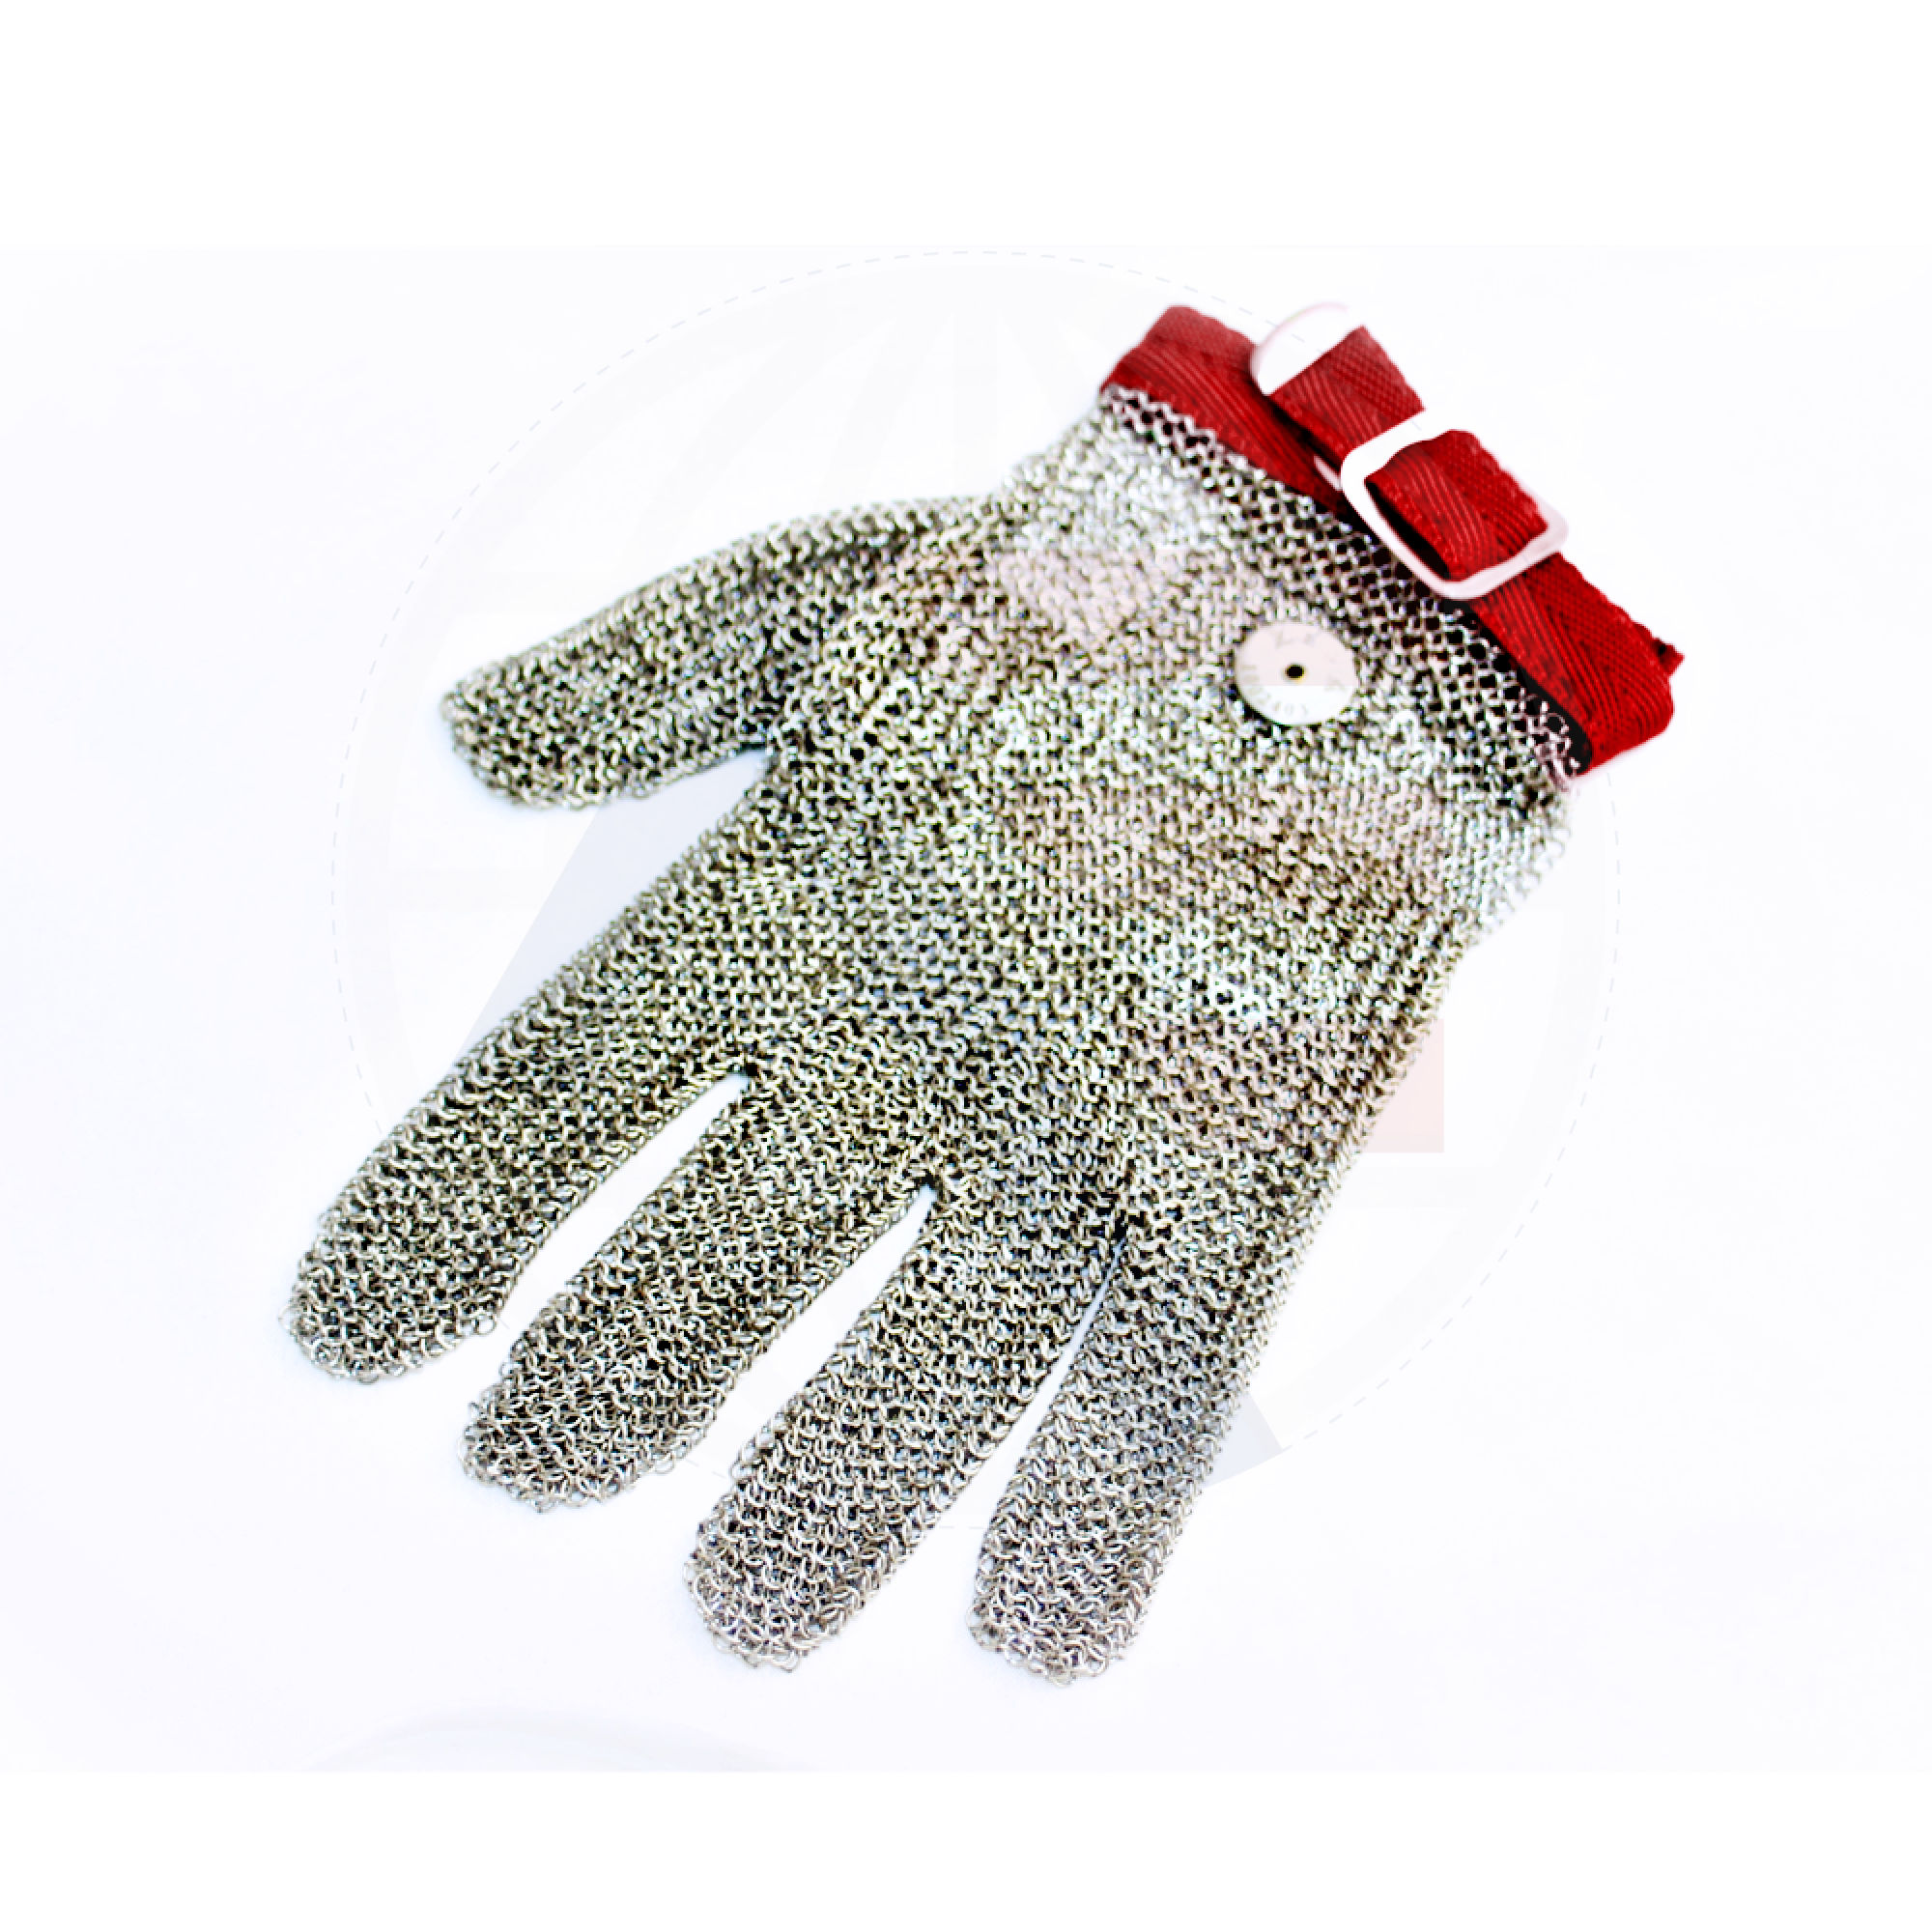 Chainmailglove Protective Safety Glove M